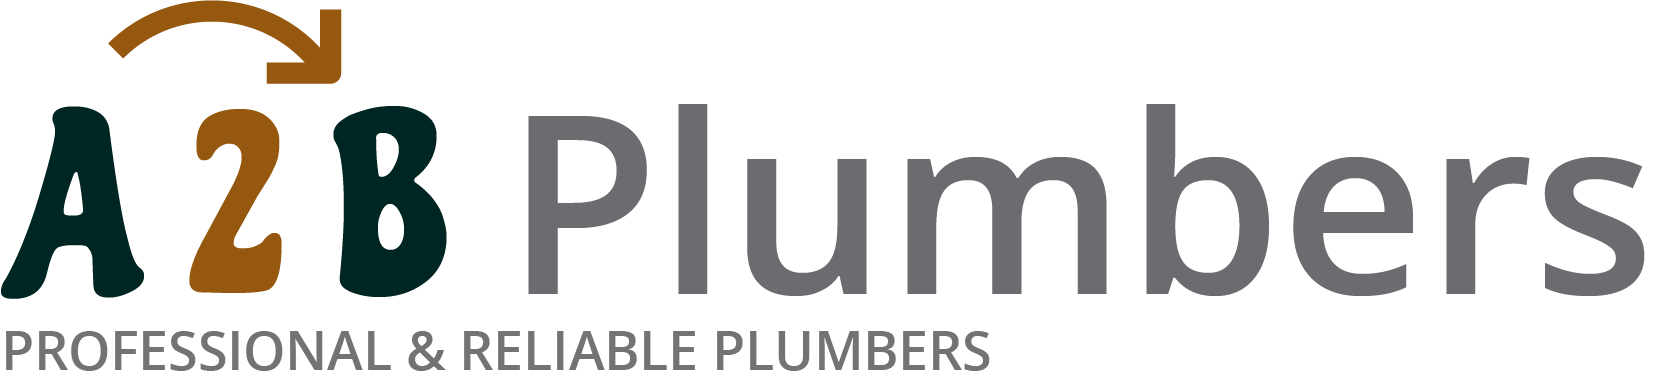 If you need a boiler installed, a radiator repaired or a leaking tap fixed, call us now - we provide services for properties in Rushall and the local area.